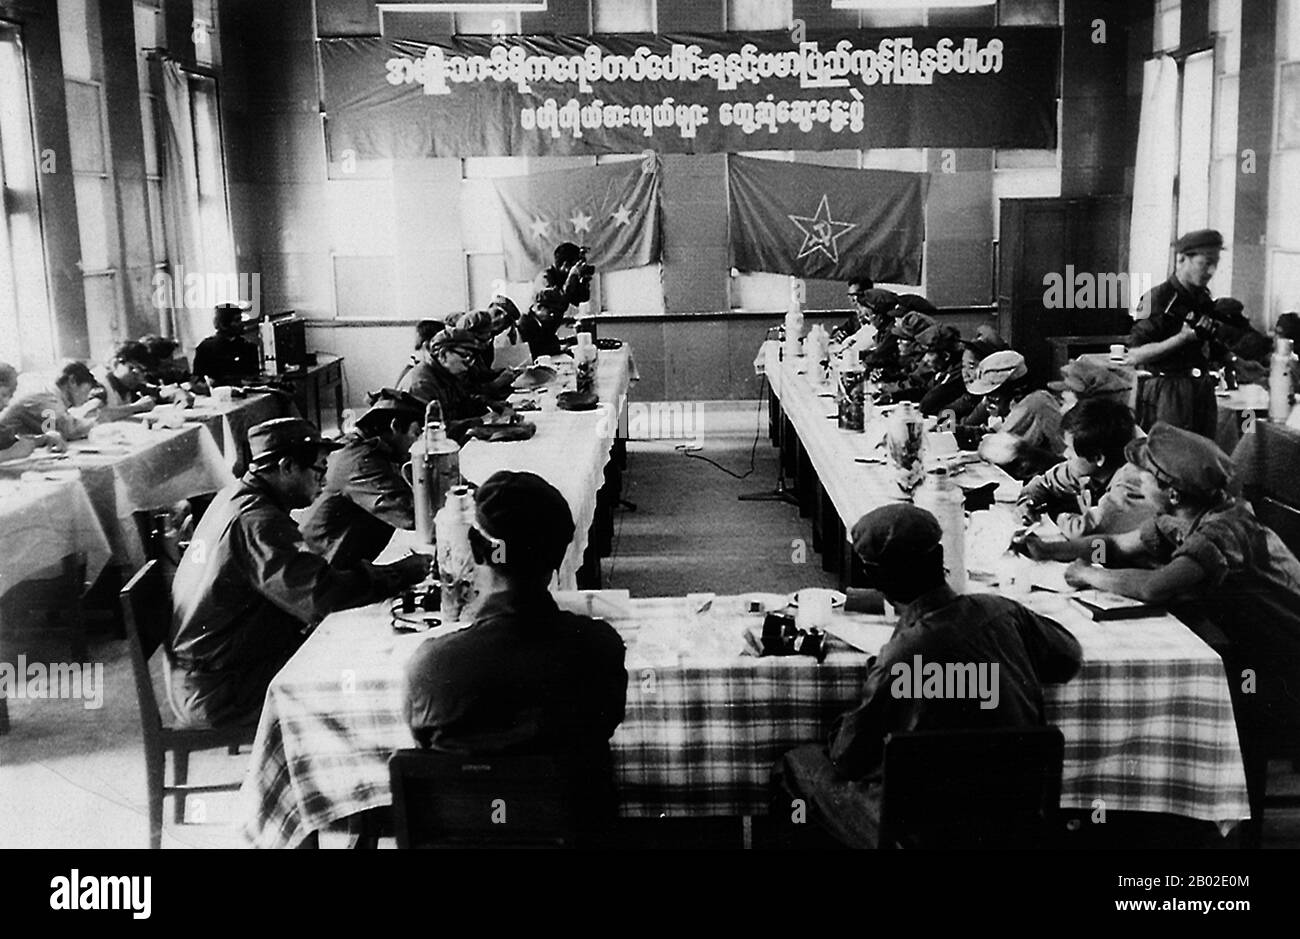 The Communist Party of Burma (Burmese: ဗမာပြည်ကွန်မြူနစ်ပါတီ; CPB) is the oldest existing political party in Burma. The party is unrecognised by the Burmese authorities, rendering it illegal; so it operates in a clandestine manner, often associating with insurgent armies along the border of People's Republic of China. It is often referred to as the Burma Communist Party (BCP) by both the Burmese government and the foreign media.  The National Democratic Front (NDF) was an umbrella organisation of about a dozen non-Communist ethnic rebel armies in Burma and was set up in 1976. Stock Photo